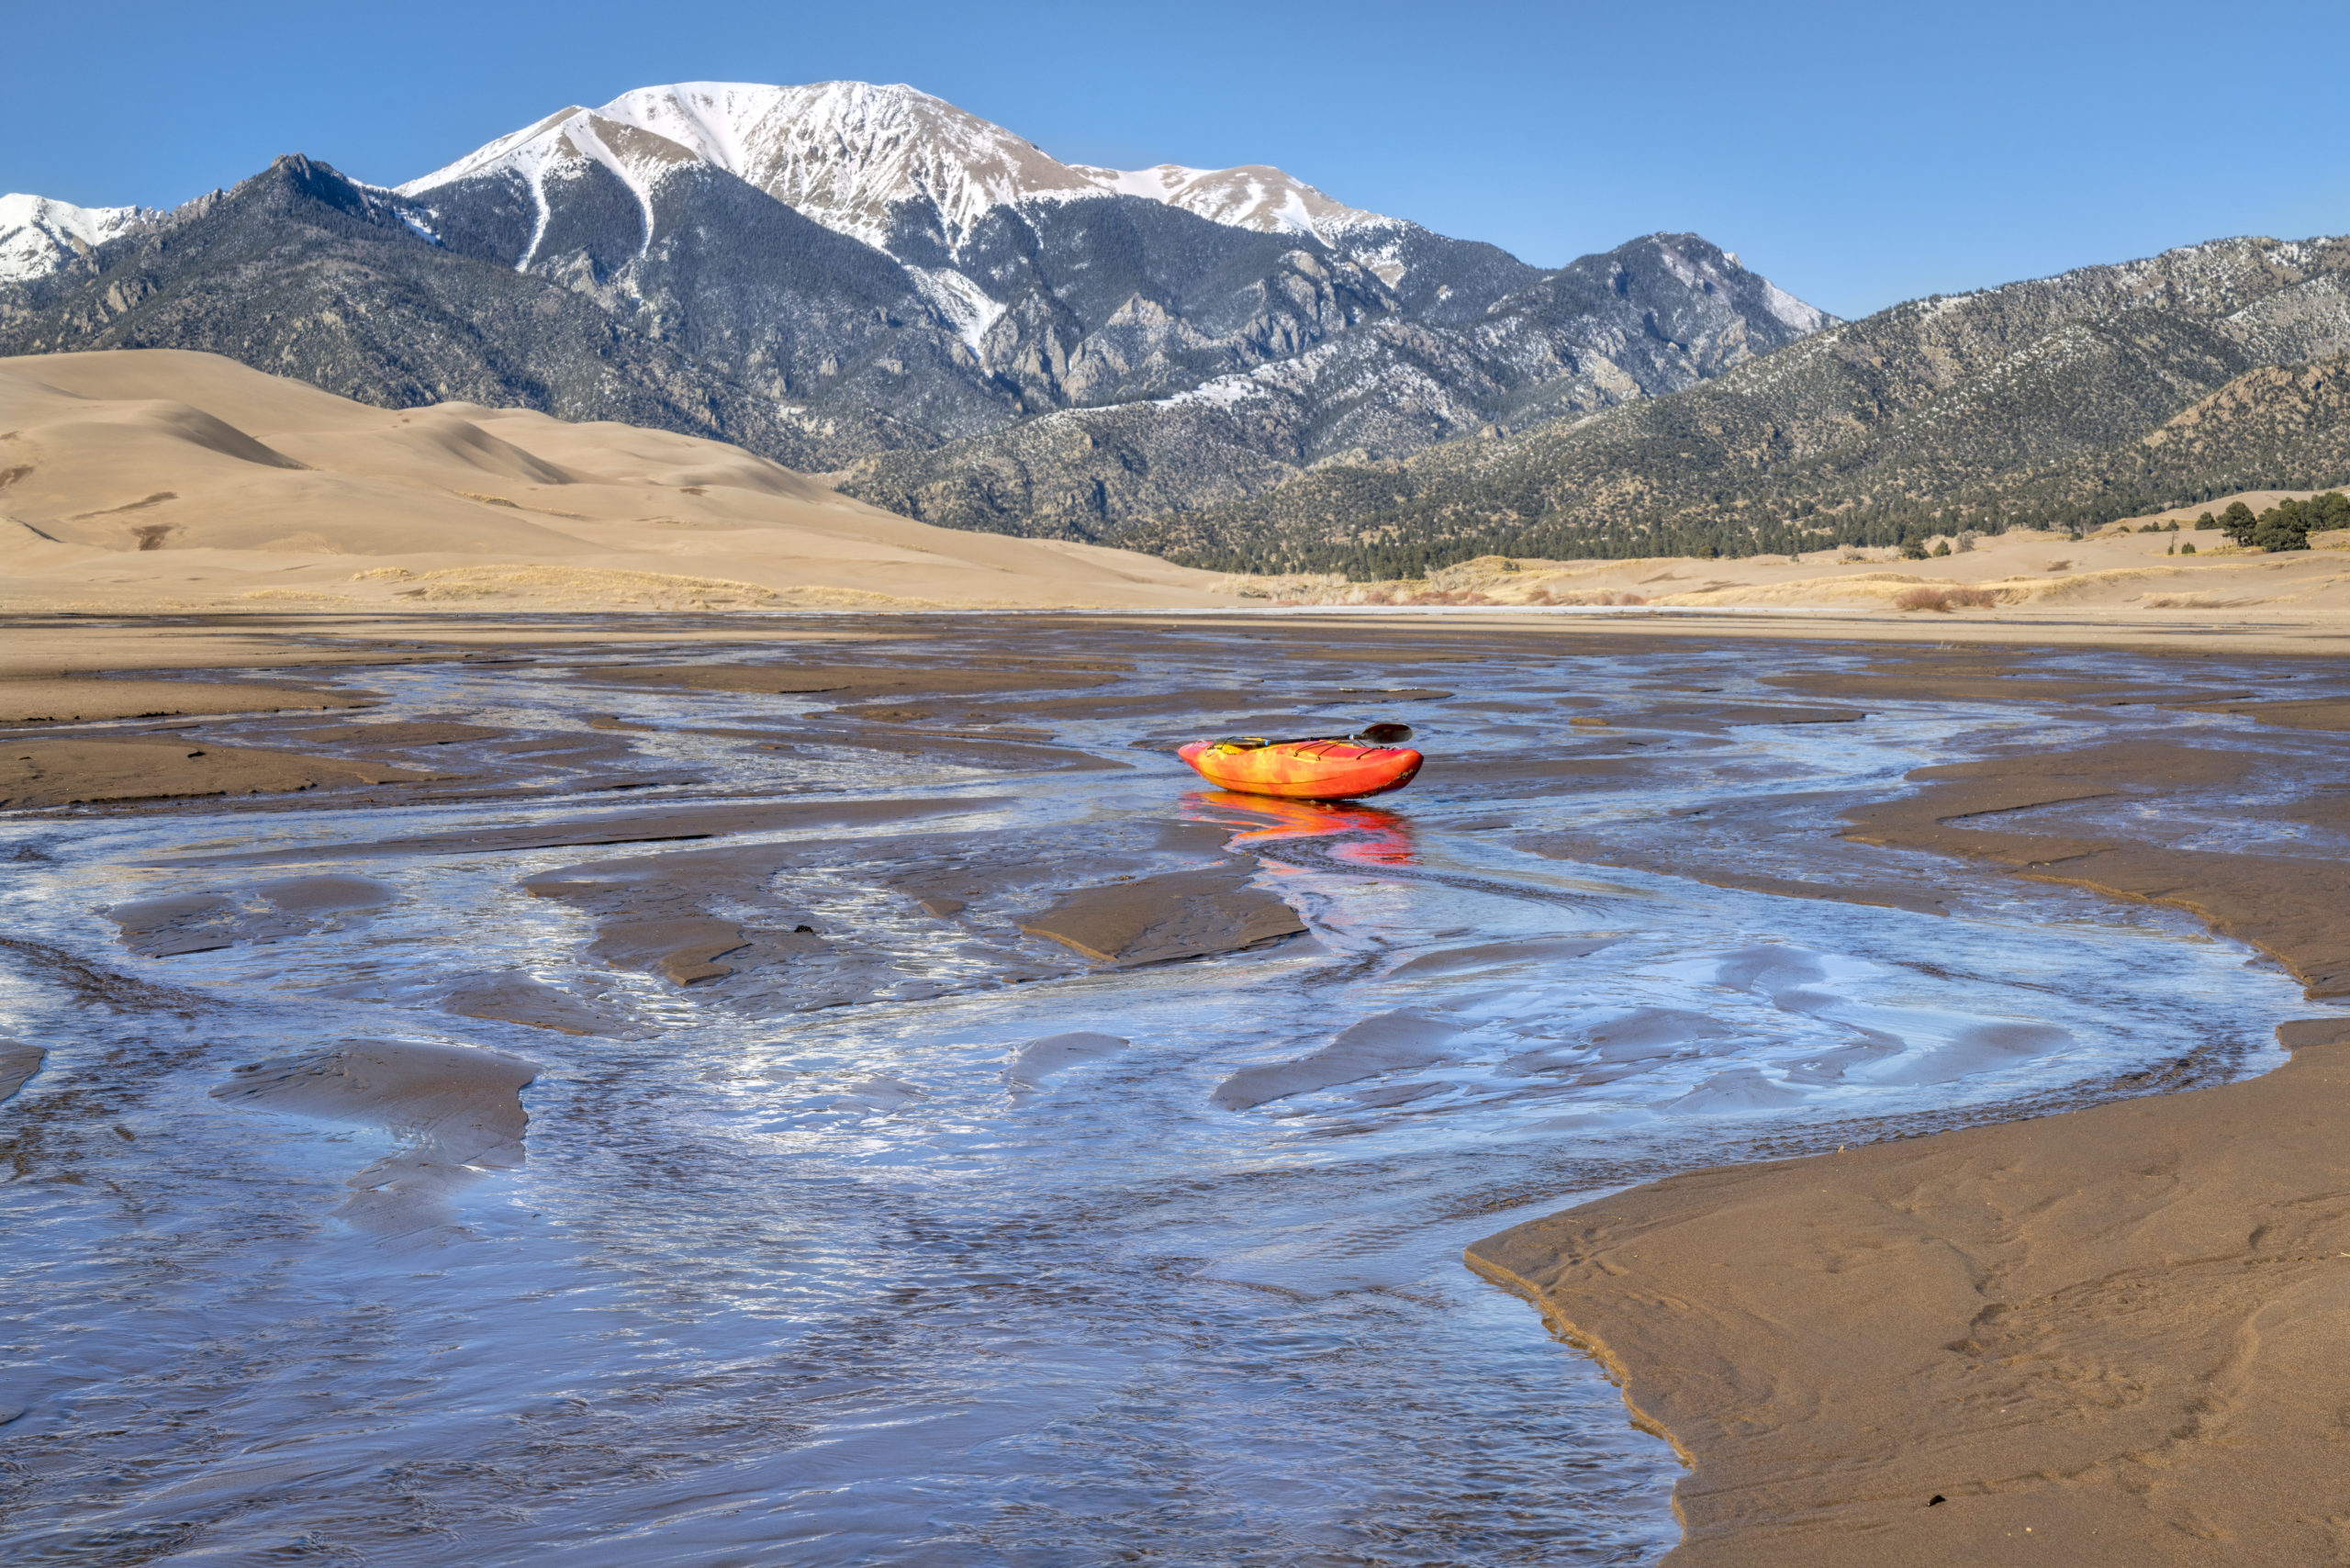 whitewater kayak in shallow water and sand dunes